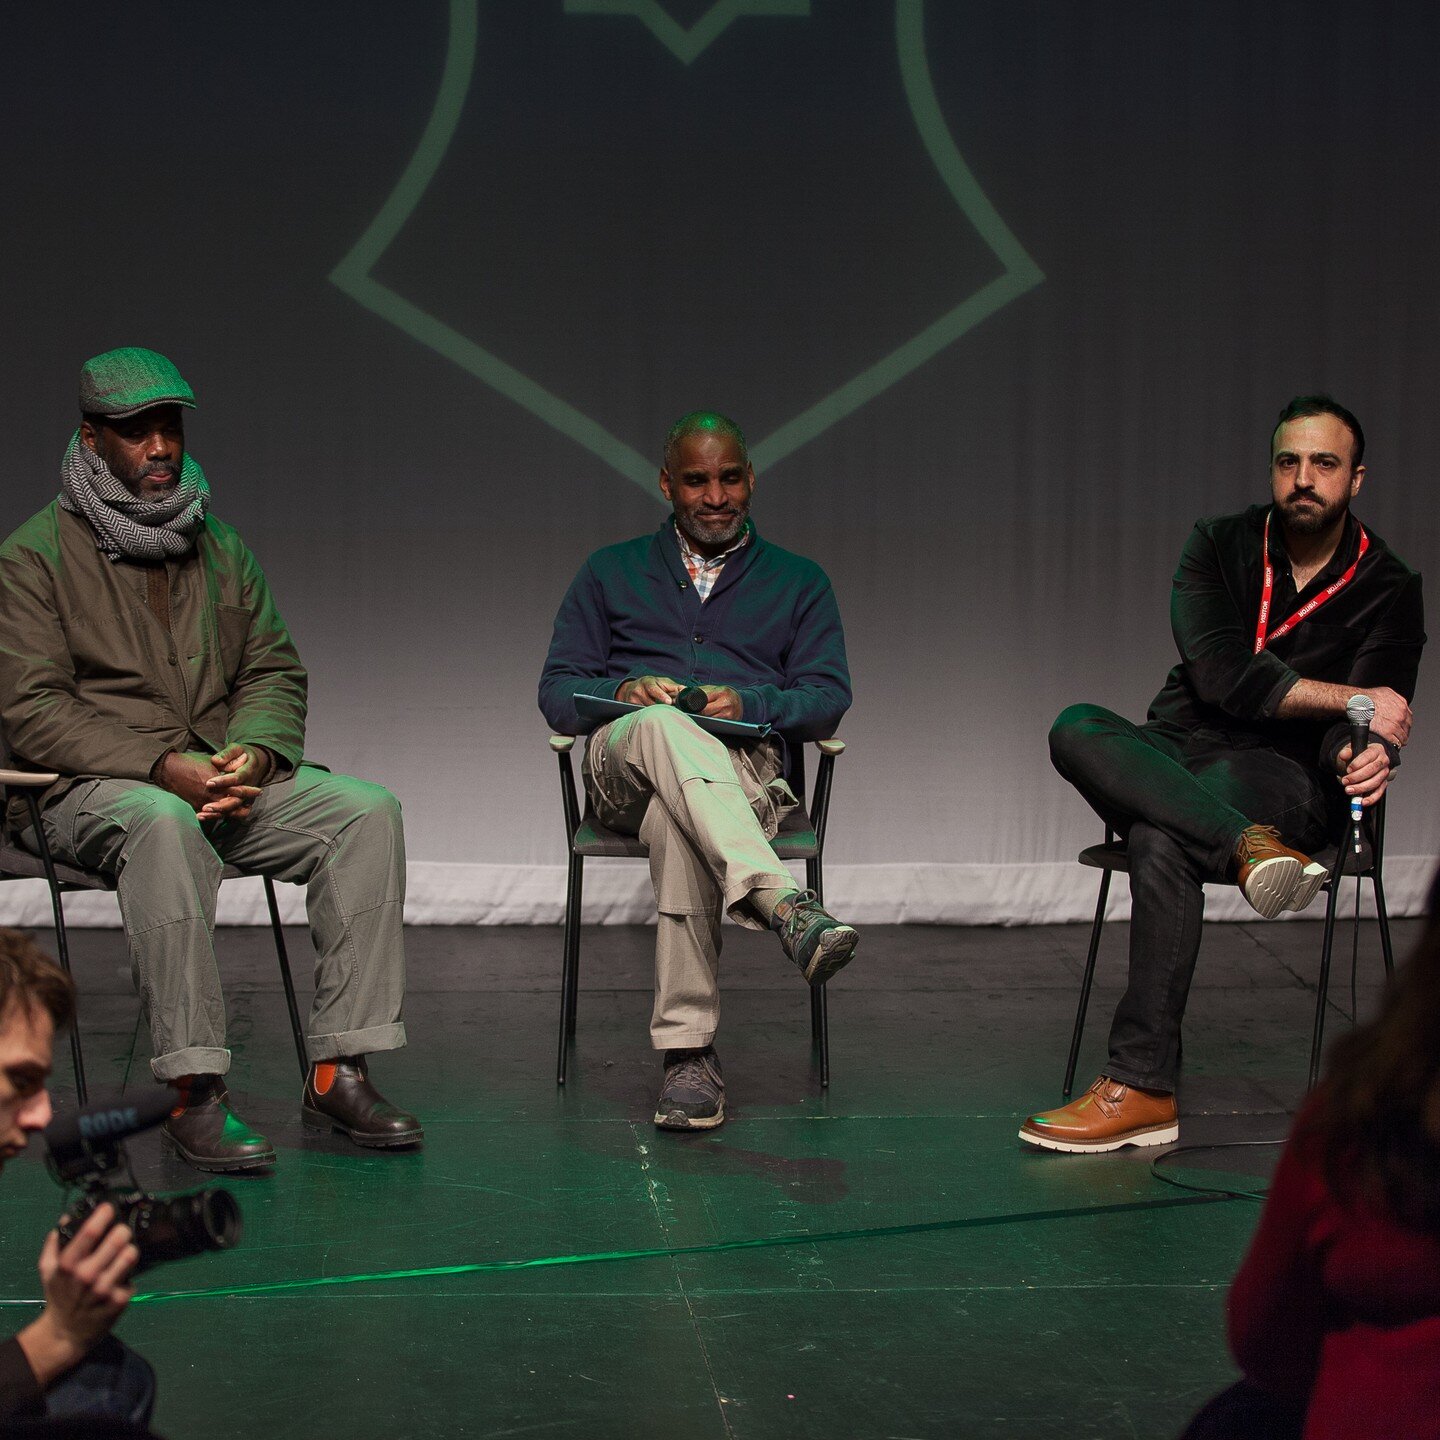 Pictures just in from the launch of the @alchemy_arts_ltd @muslimartistsacademy's theatre strand at Contact Theatre, Manchester on the evening of 20th January. We were fortunate to have an almost capacity audience for my presentation reflecting on Kh